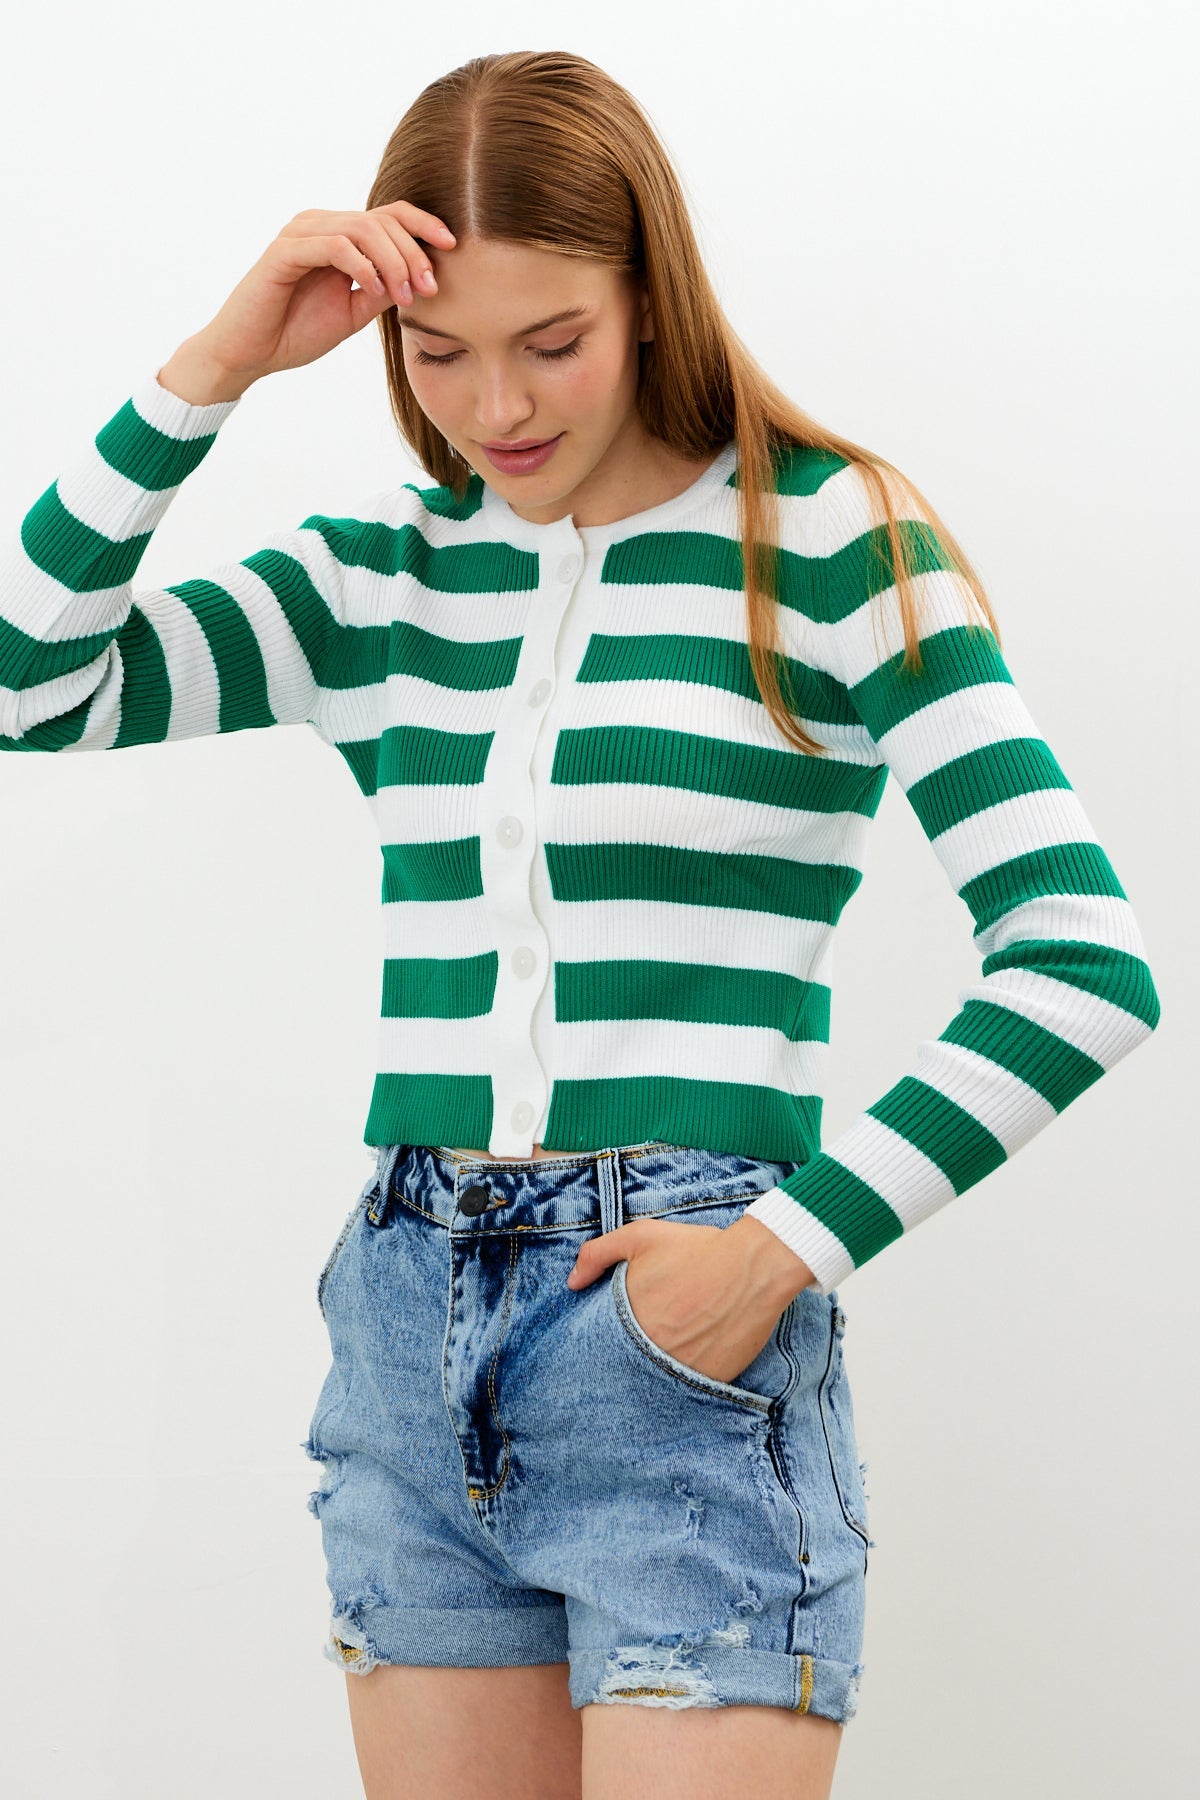 Striped Knit Top Button Detailed Top - SKU: 1093